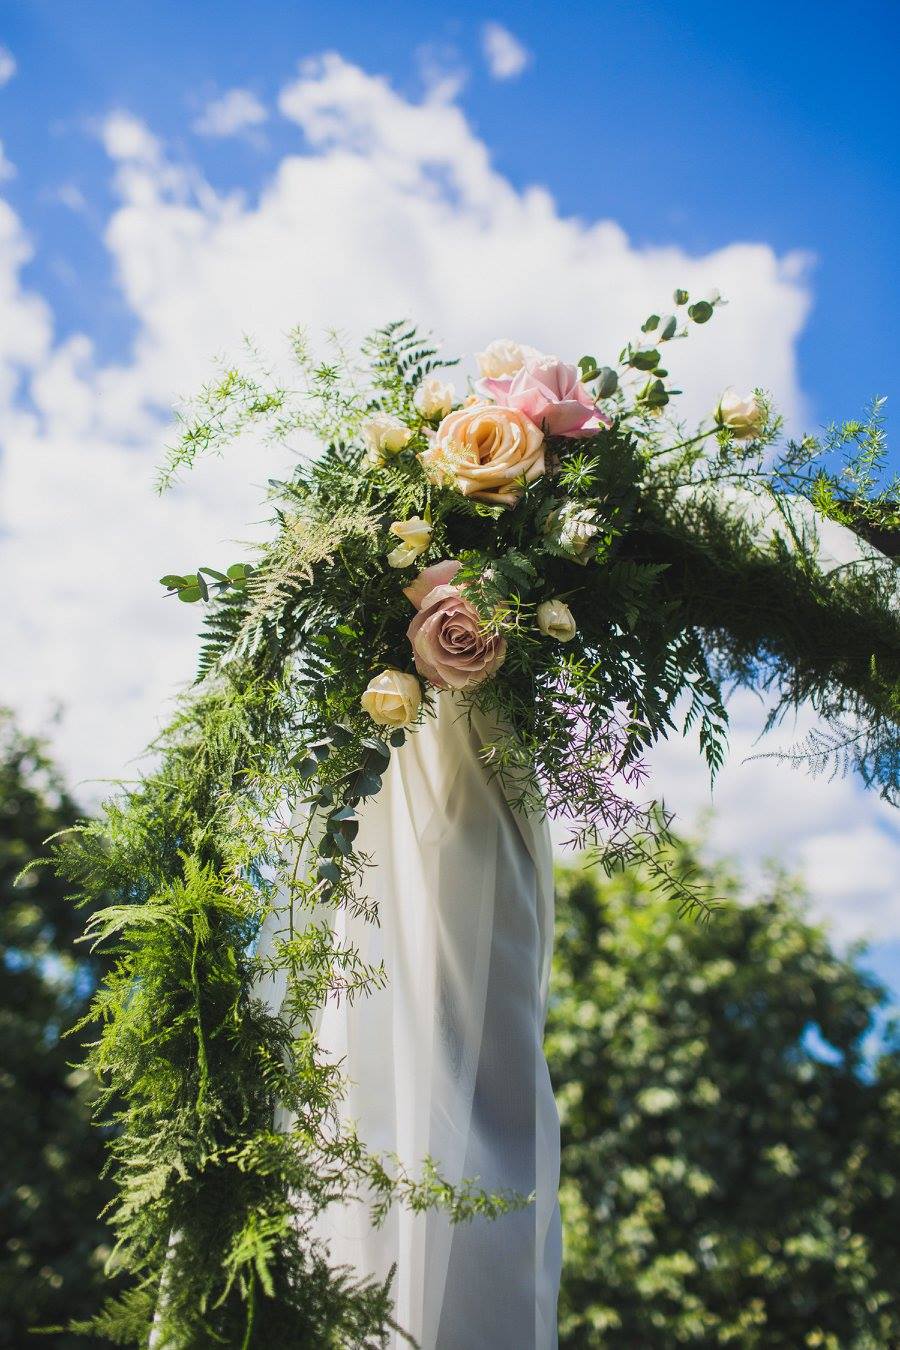 This garden ceremony was super chic with an arbor draped in white, greenery and plenty of pink roses. We have more garden wedding inspiration up on the blog right now!